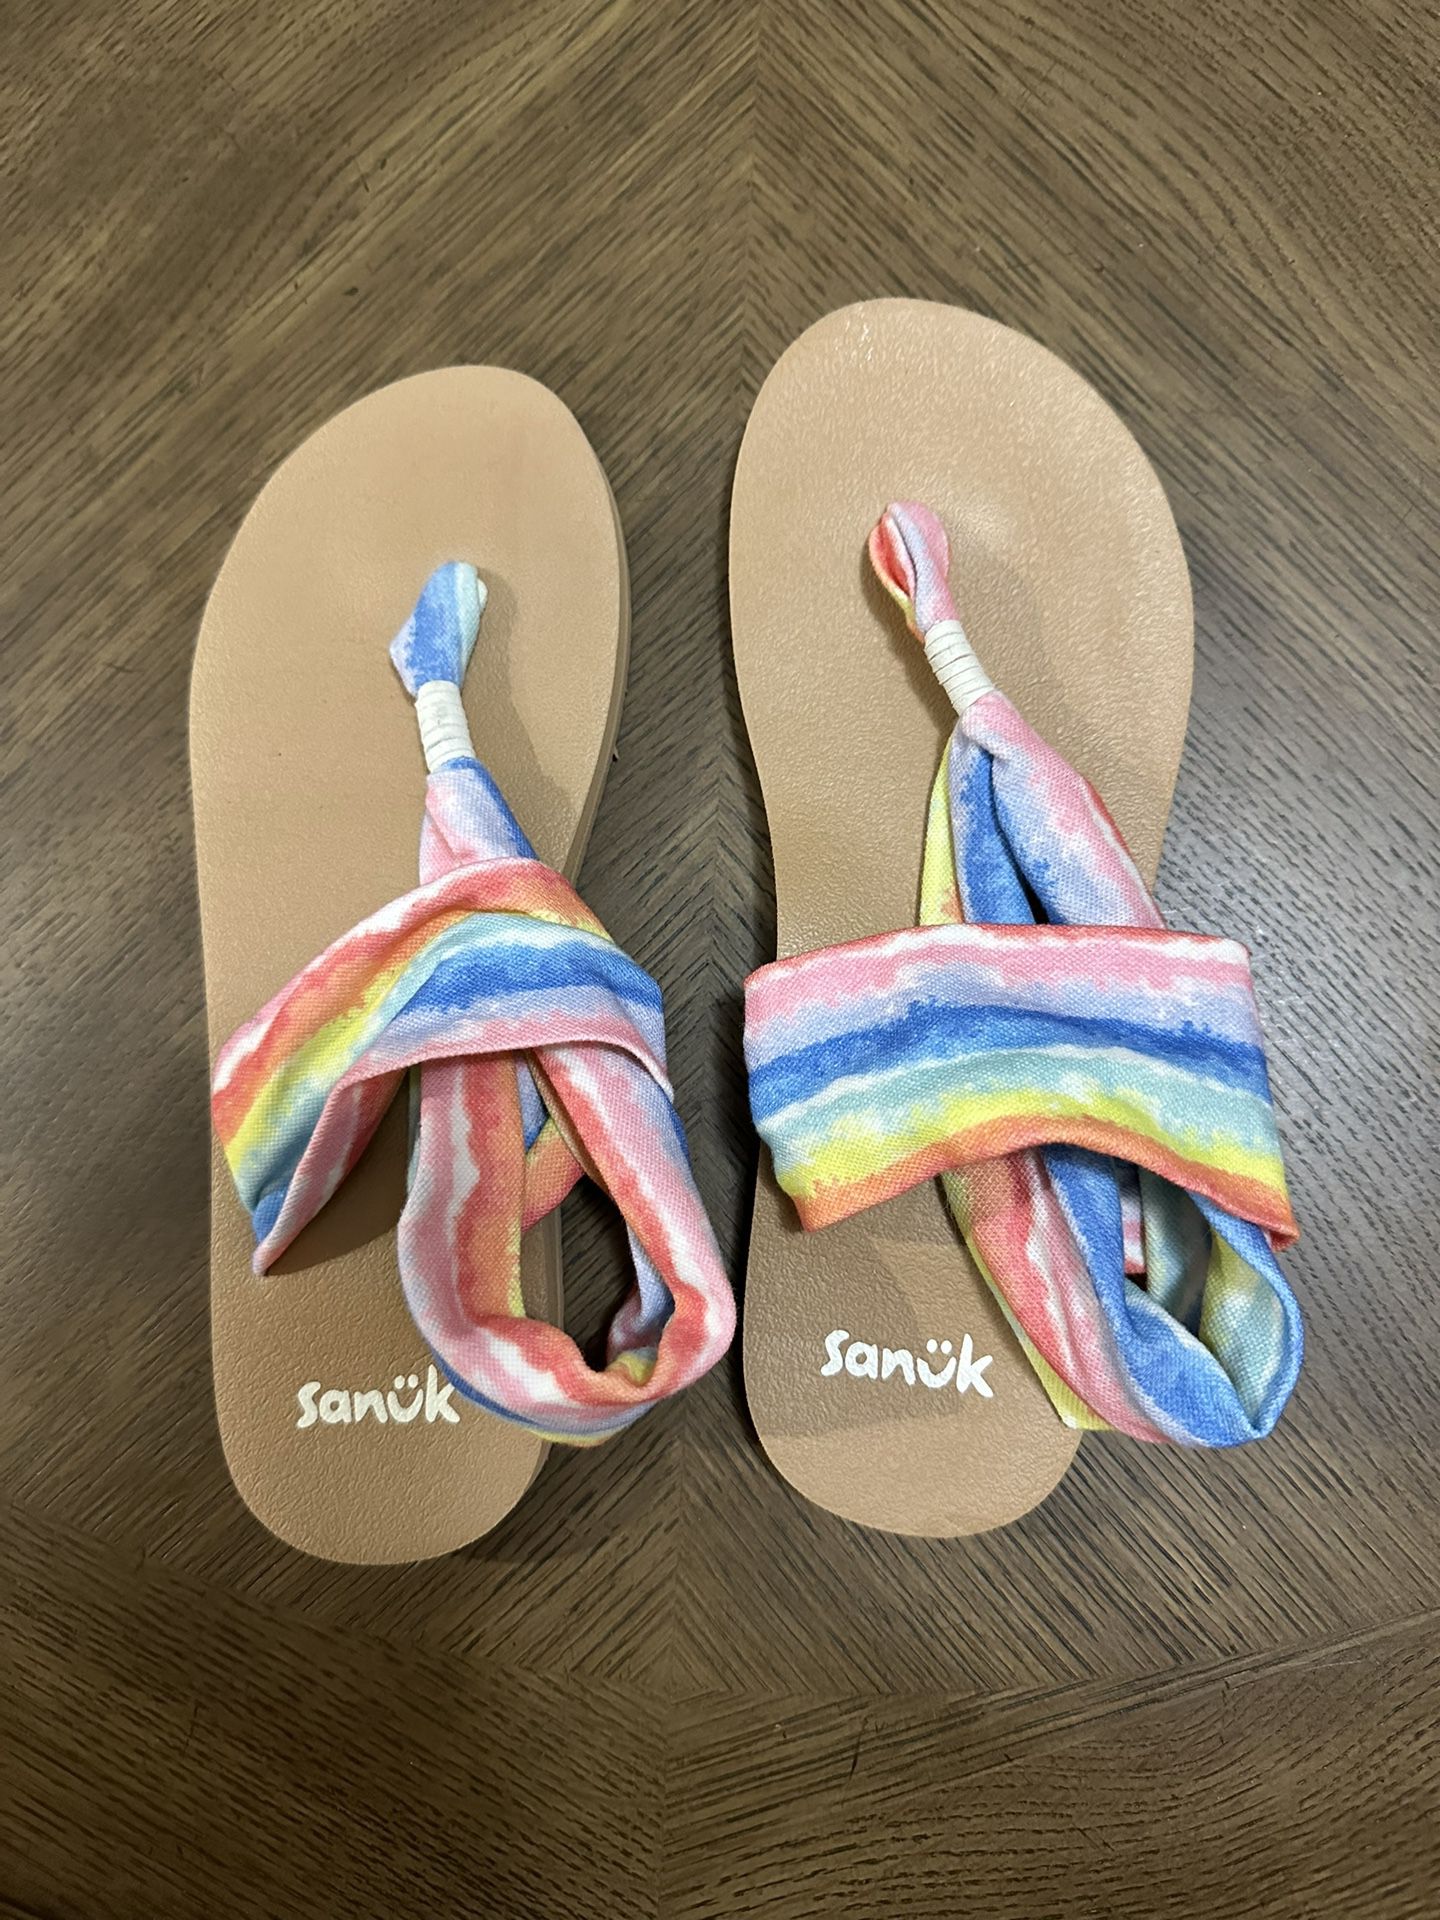 Womens Size 8 Sanuk Sandals (NEW without tags)